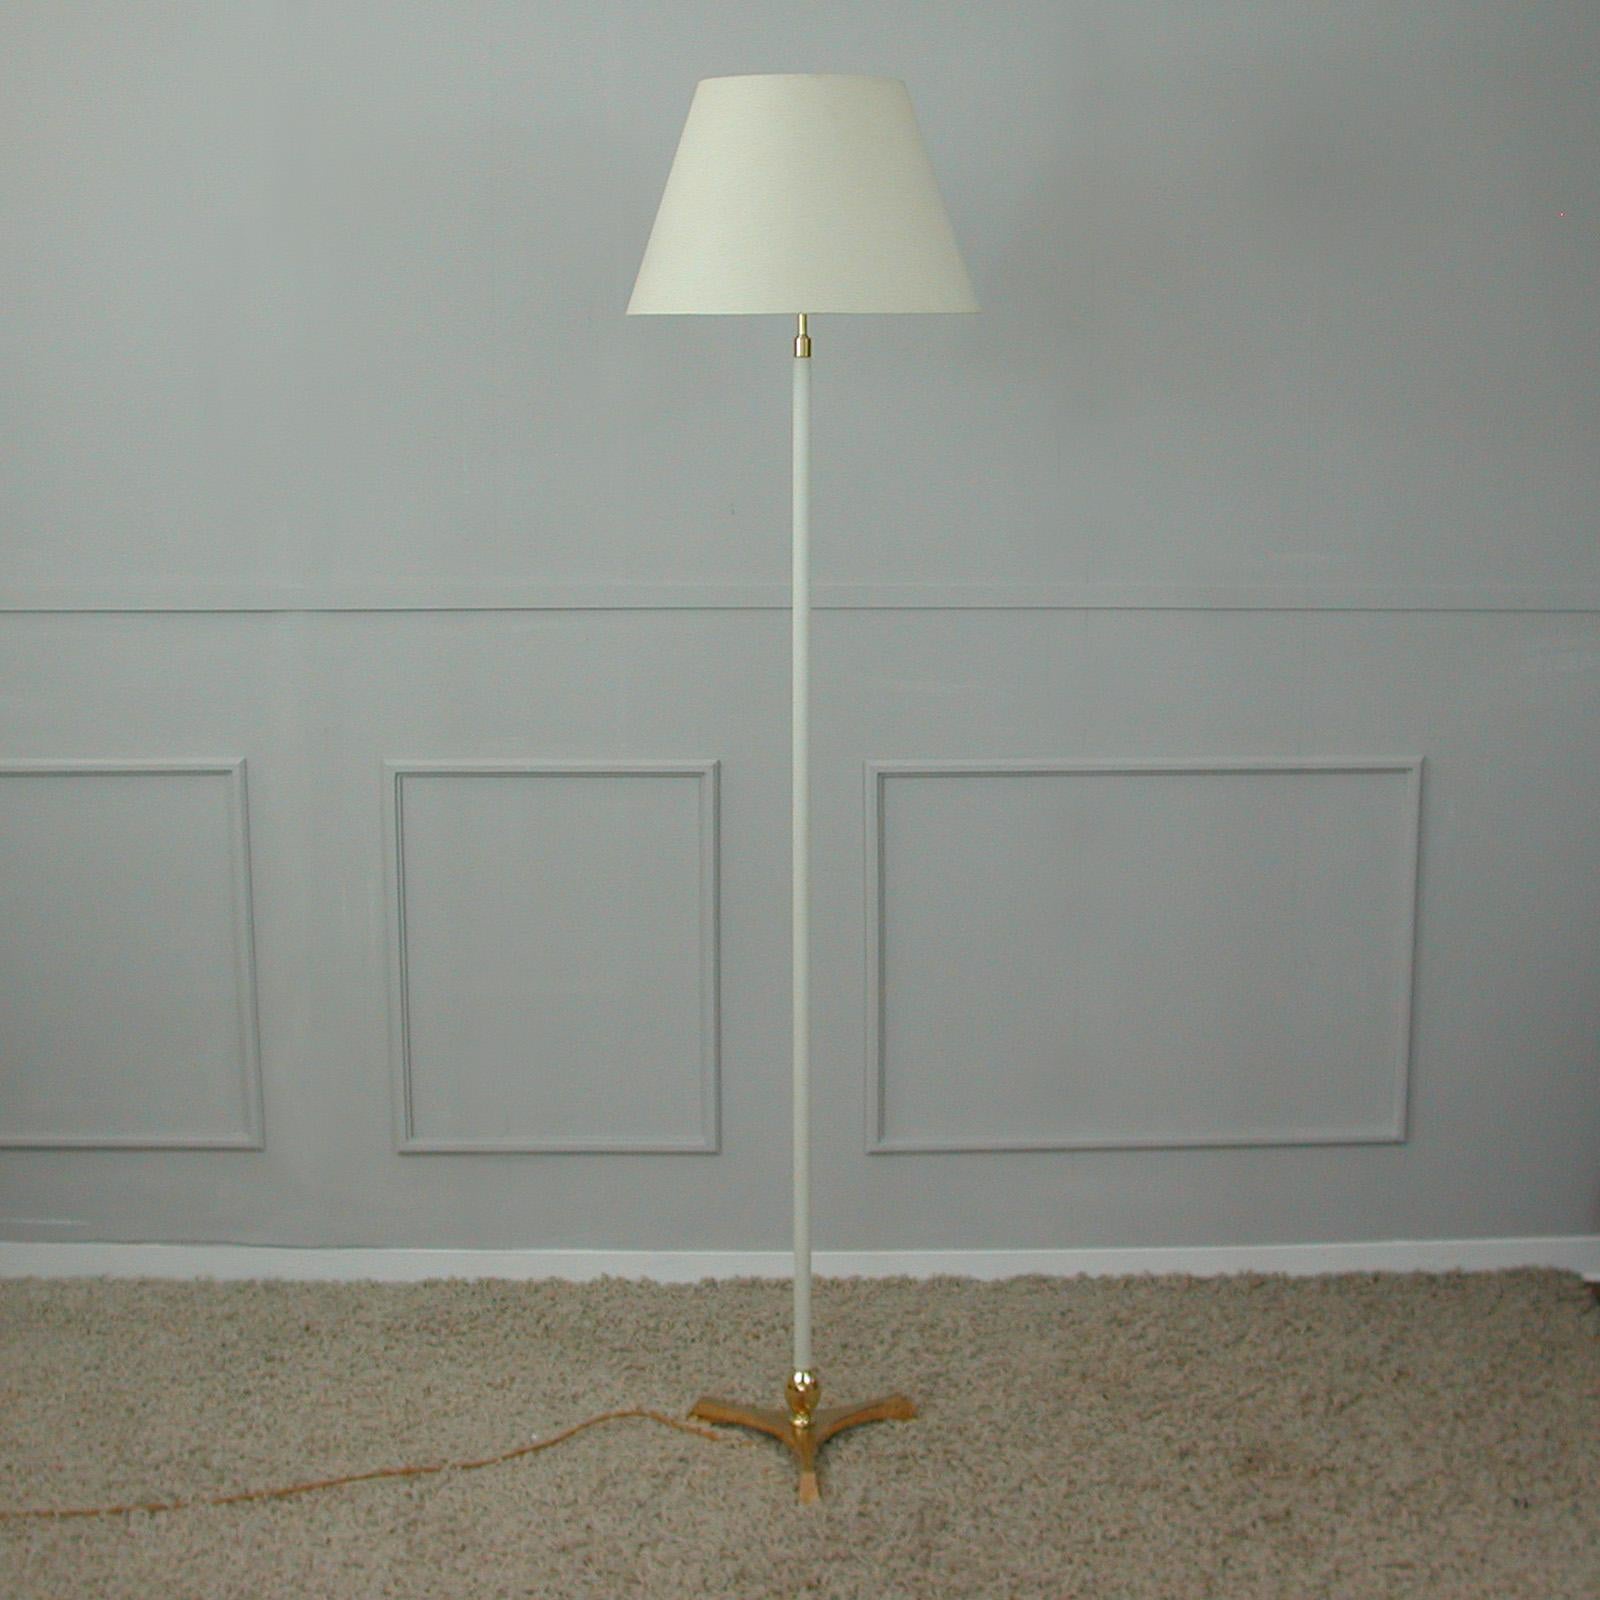 This unusual midcentury floor lamp was designed and manufactured in Germany in the 1950s to 1960s. It features a brass tripod base and saddle-stitched off white leather rod.

The lamp has got 2 E27 sockets for bulbs up to 60 Watt each. Wired for